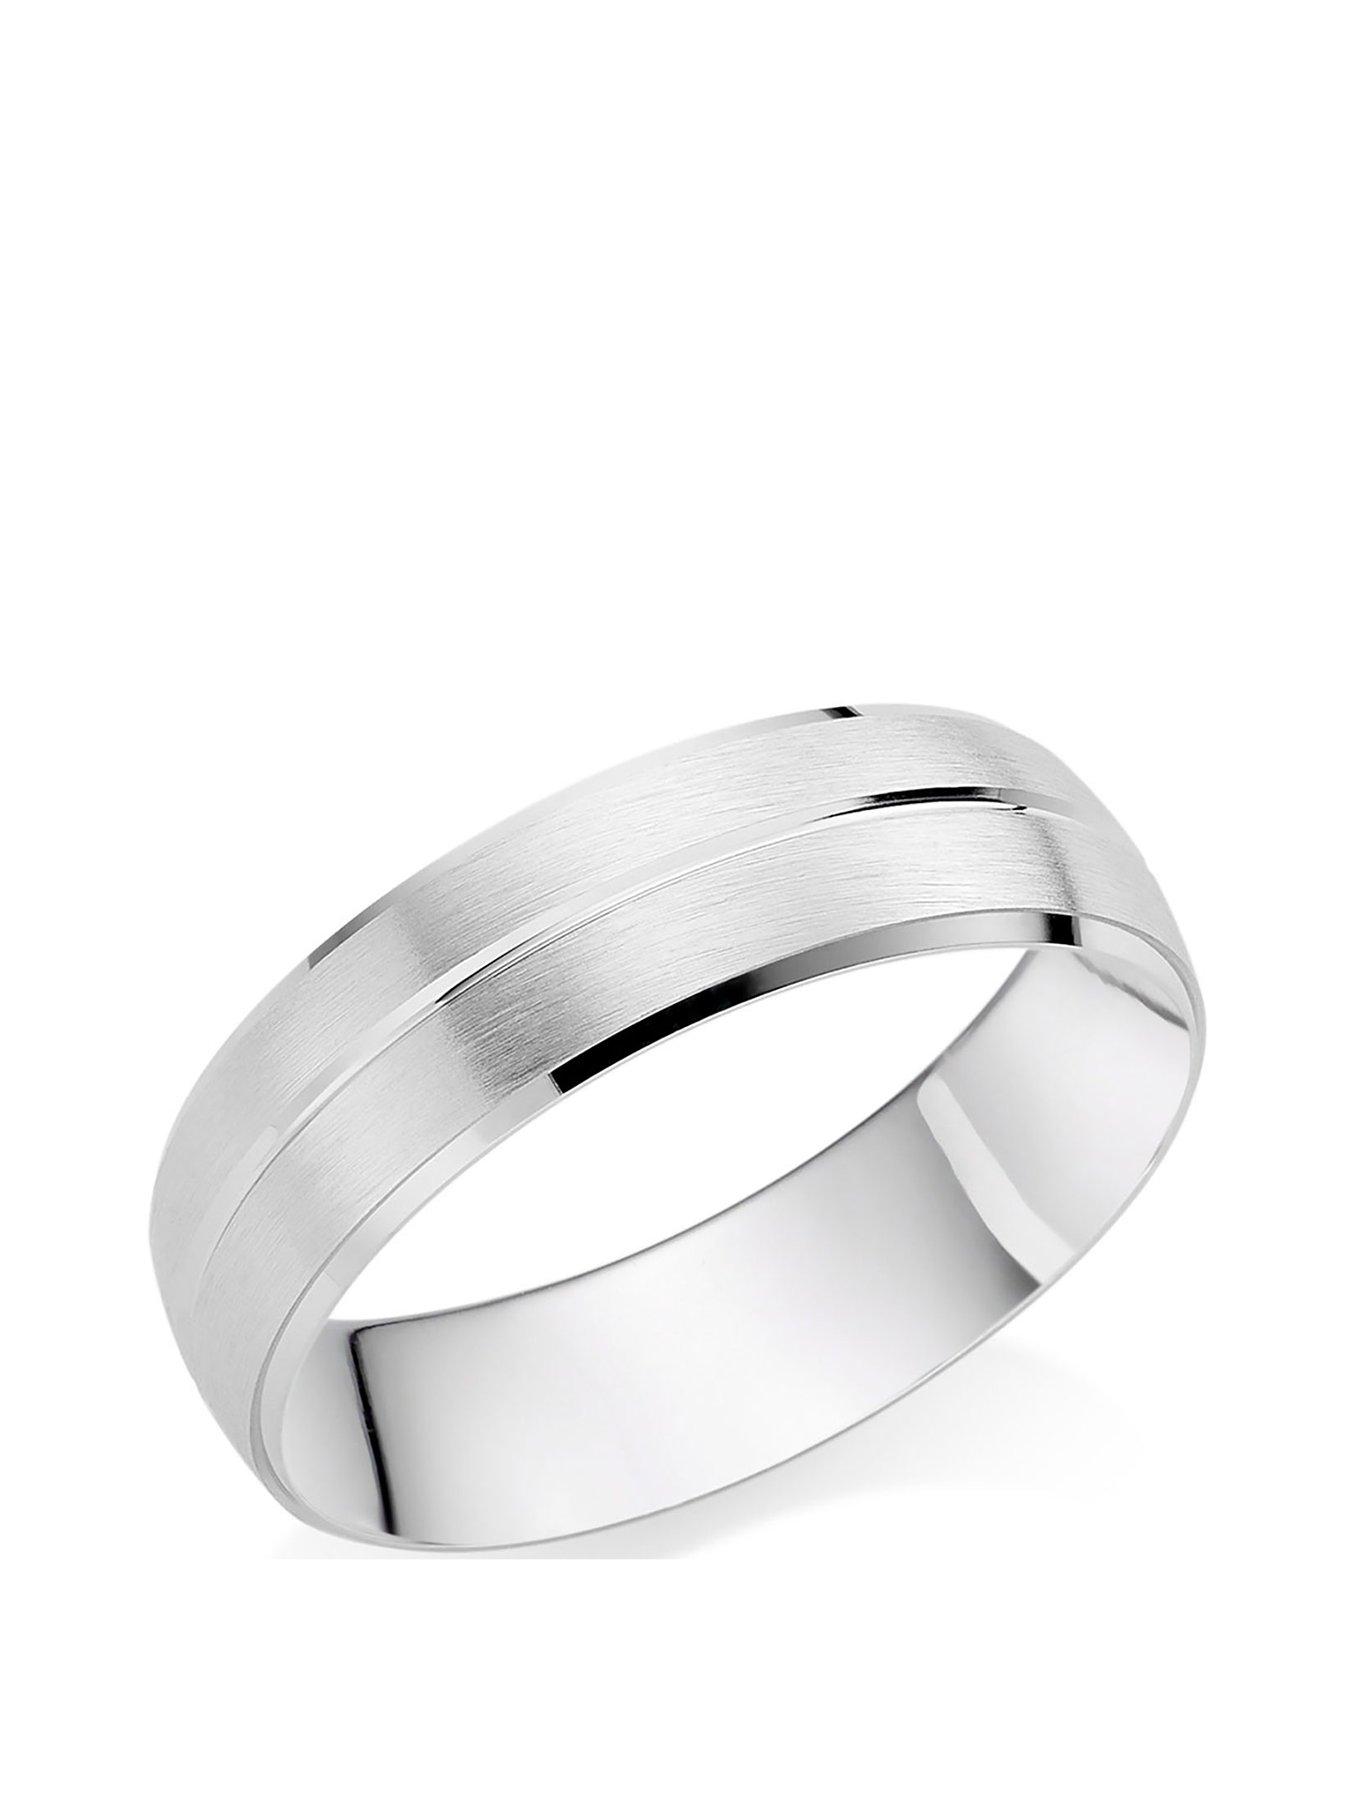 Jewellery & watches 9ct White Gold Men's Wedding Ring